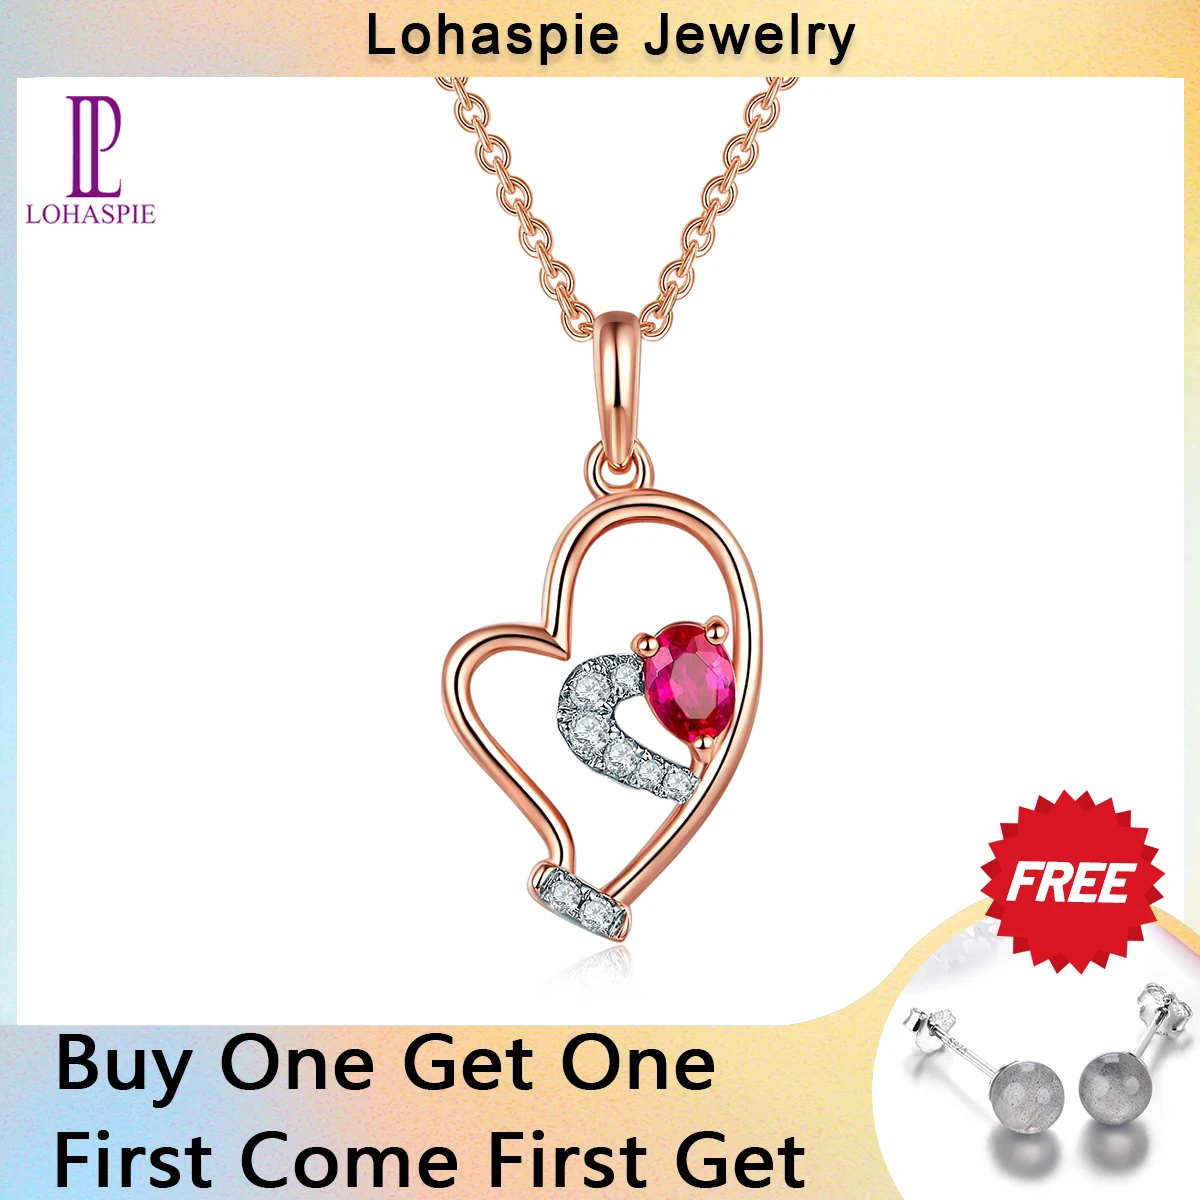 LP Diamond-Jewelry Solid 9K 10K 14K 18K Rose Gold Natural Ruby Heart Pendant For July Birthday Gift Fashion W/ Silver Chain